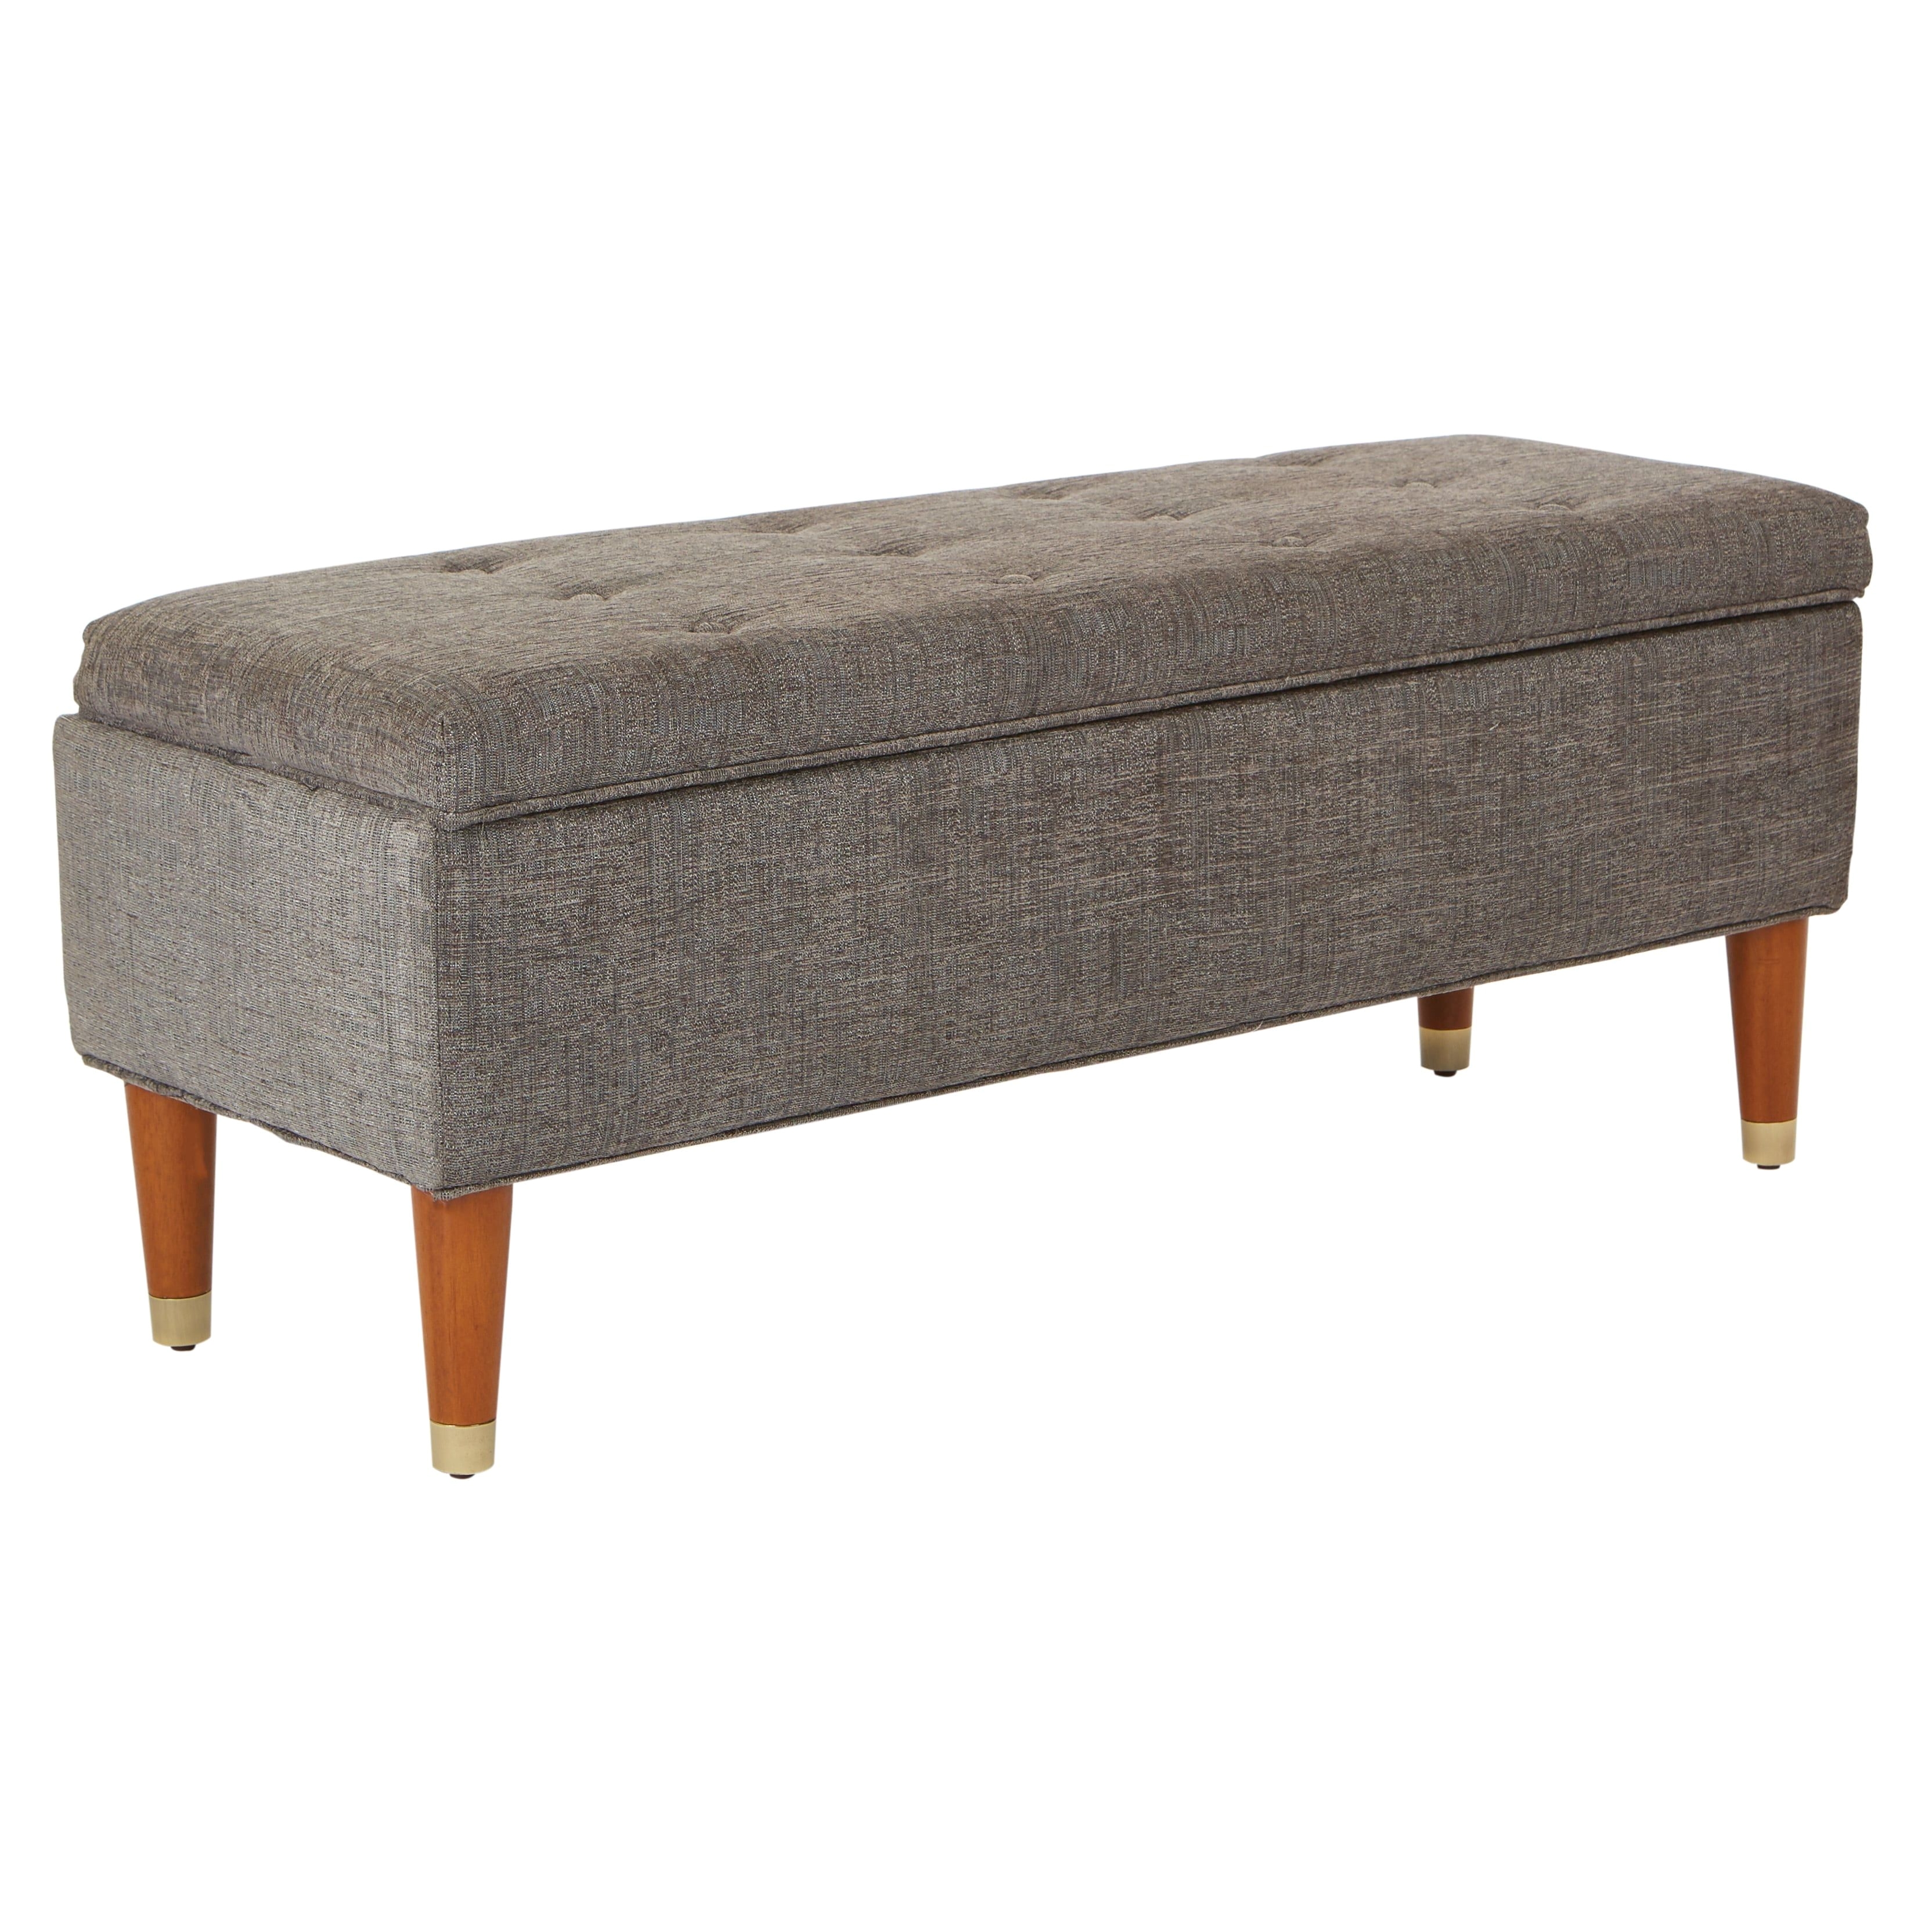 office star products inspired by bassett douglas tufted fabric storage bench with amber finish legs